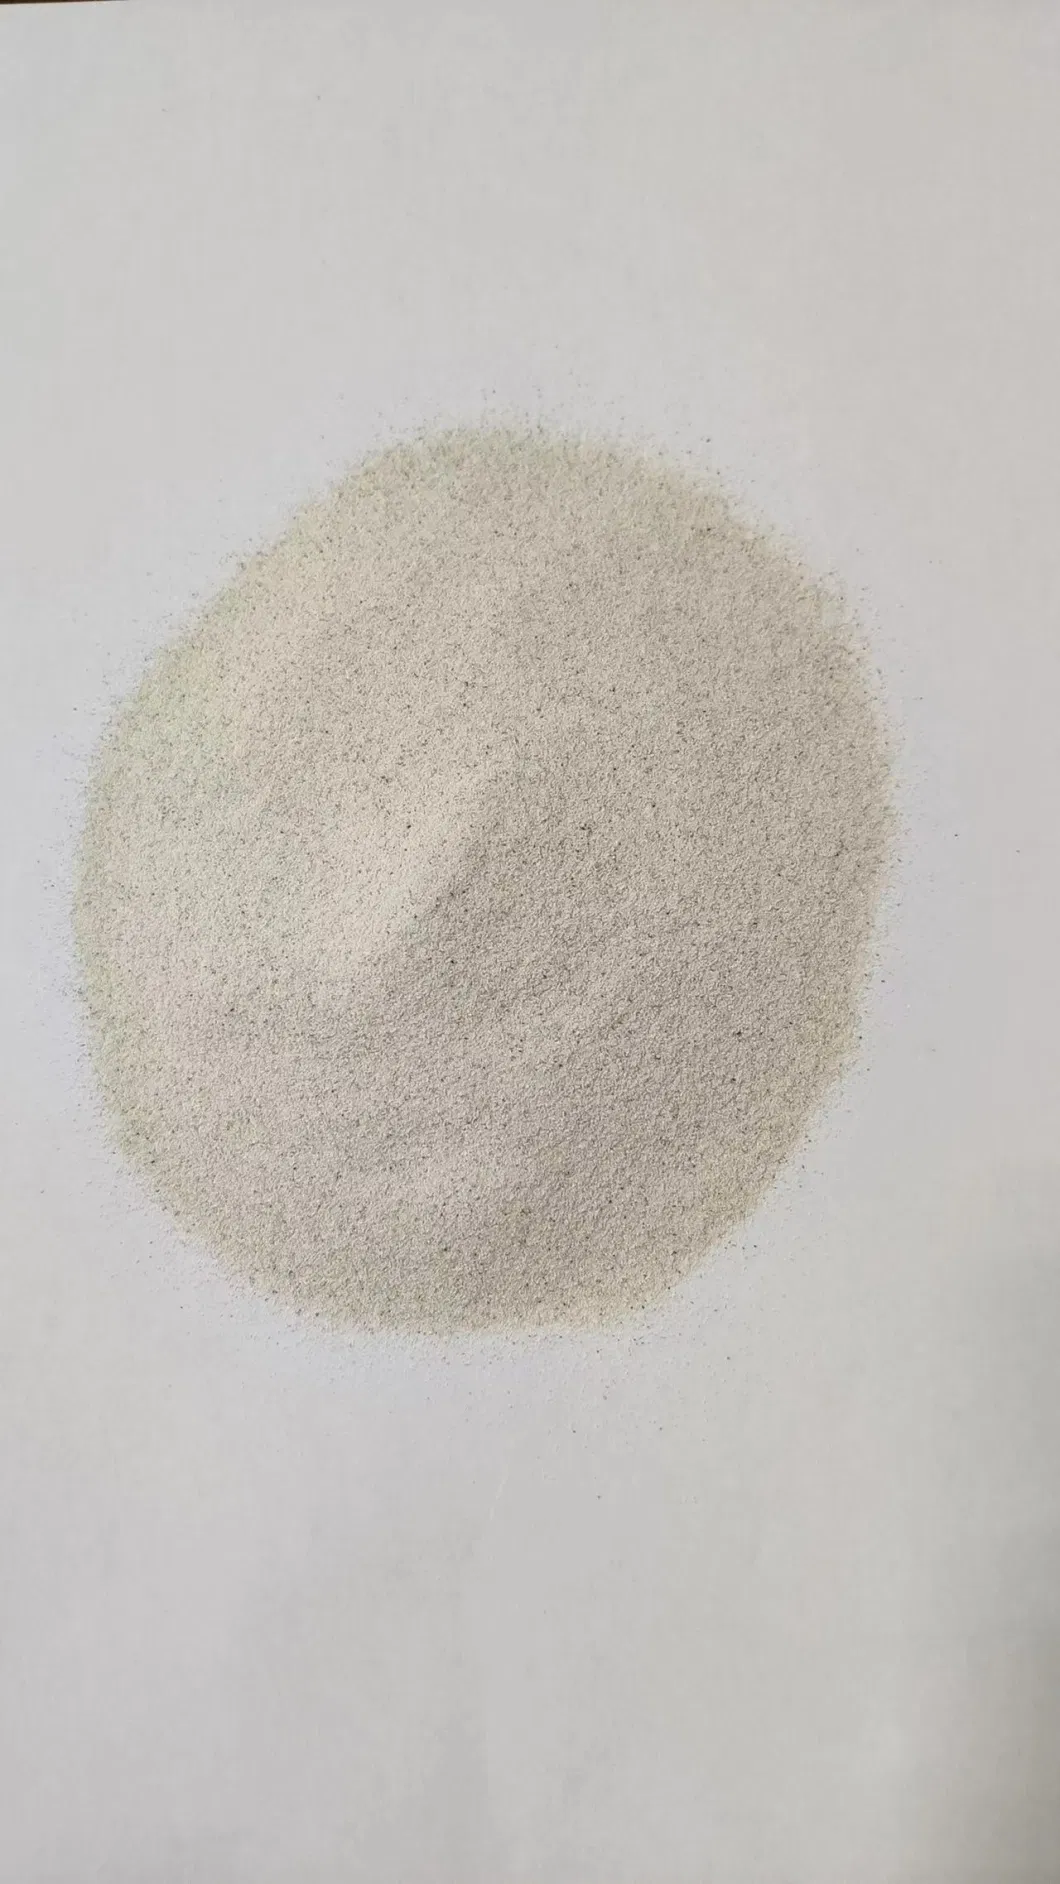 China Factory Supplier 16-30, 30-60, 60-80mesh Mullite Sand and Mullite Flour for Investment Casting